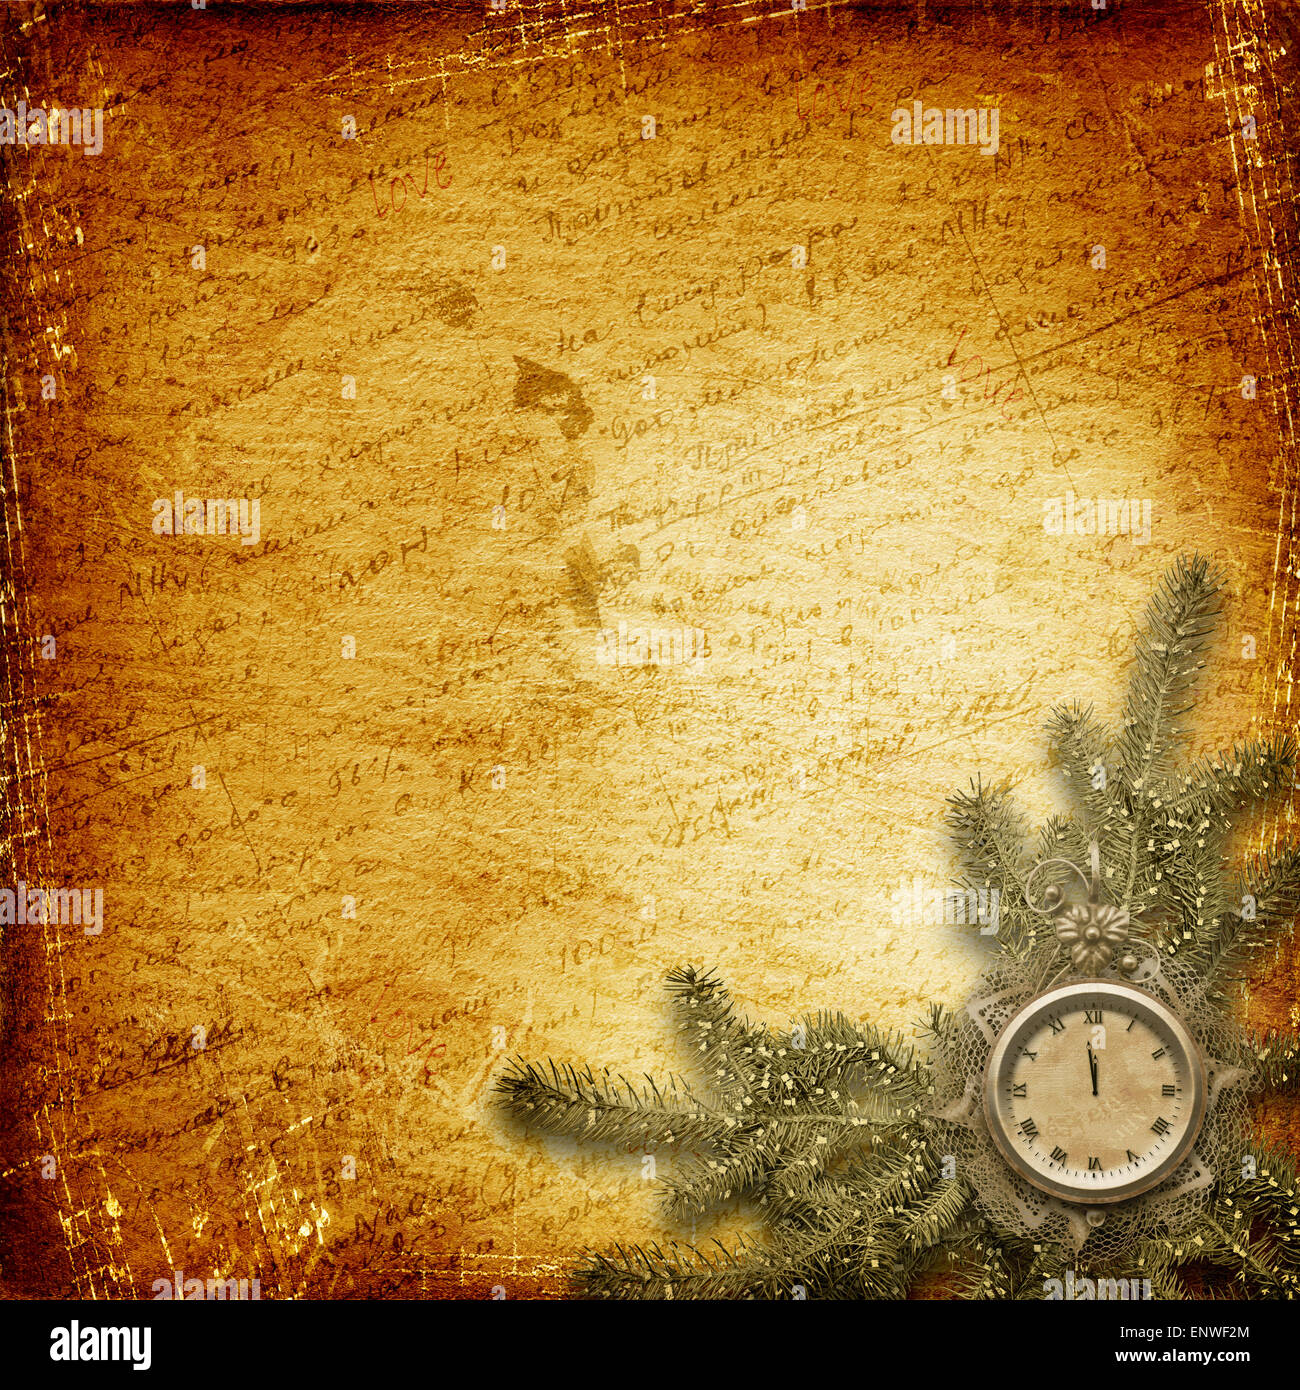 Antique clock face with lace and firtree on the abstract background Stock Photo